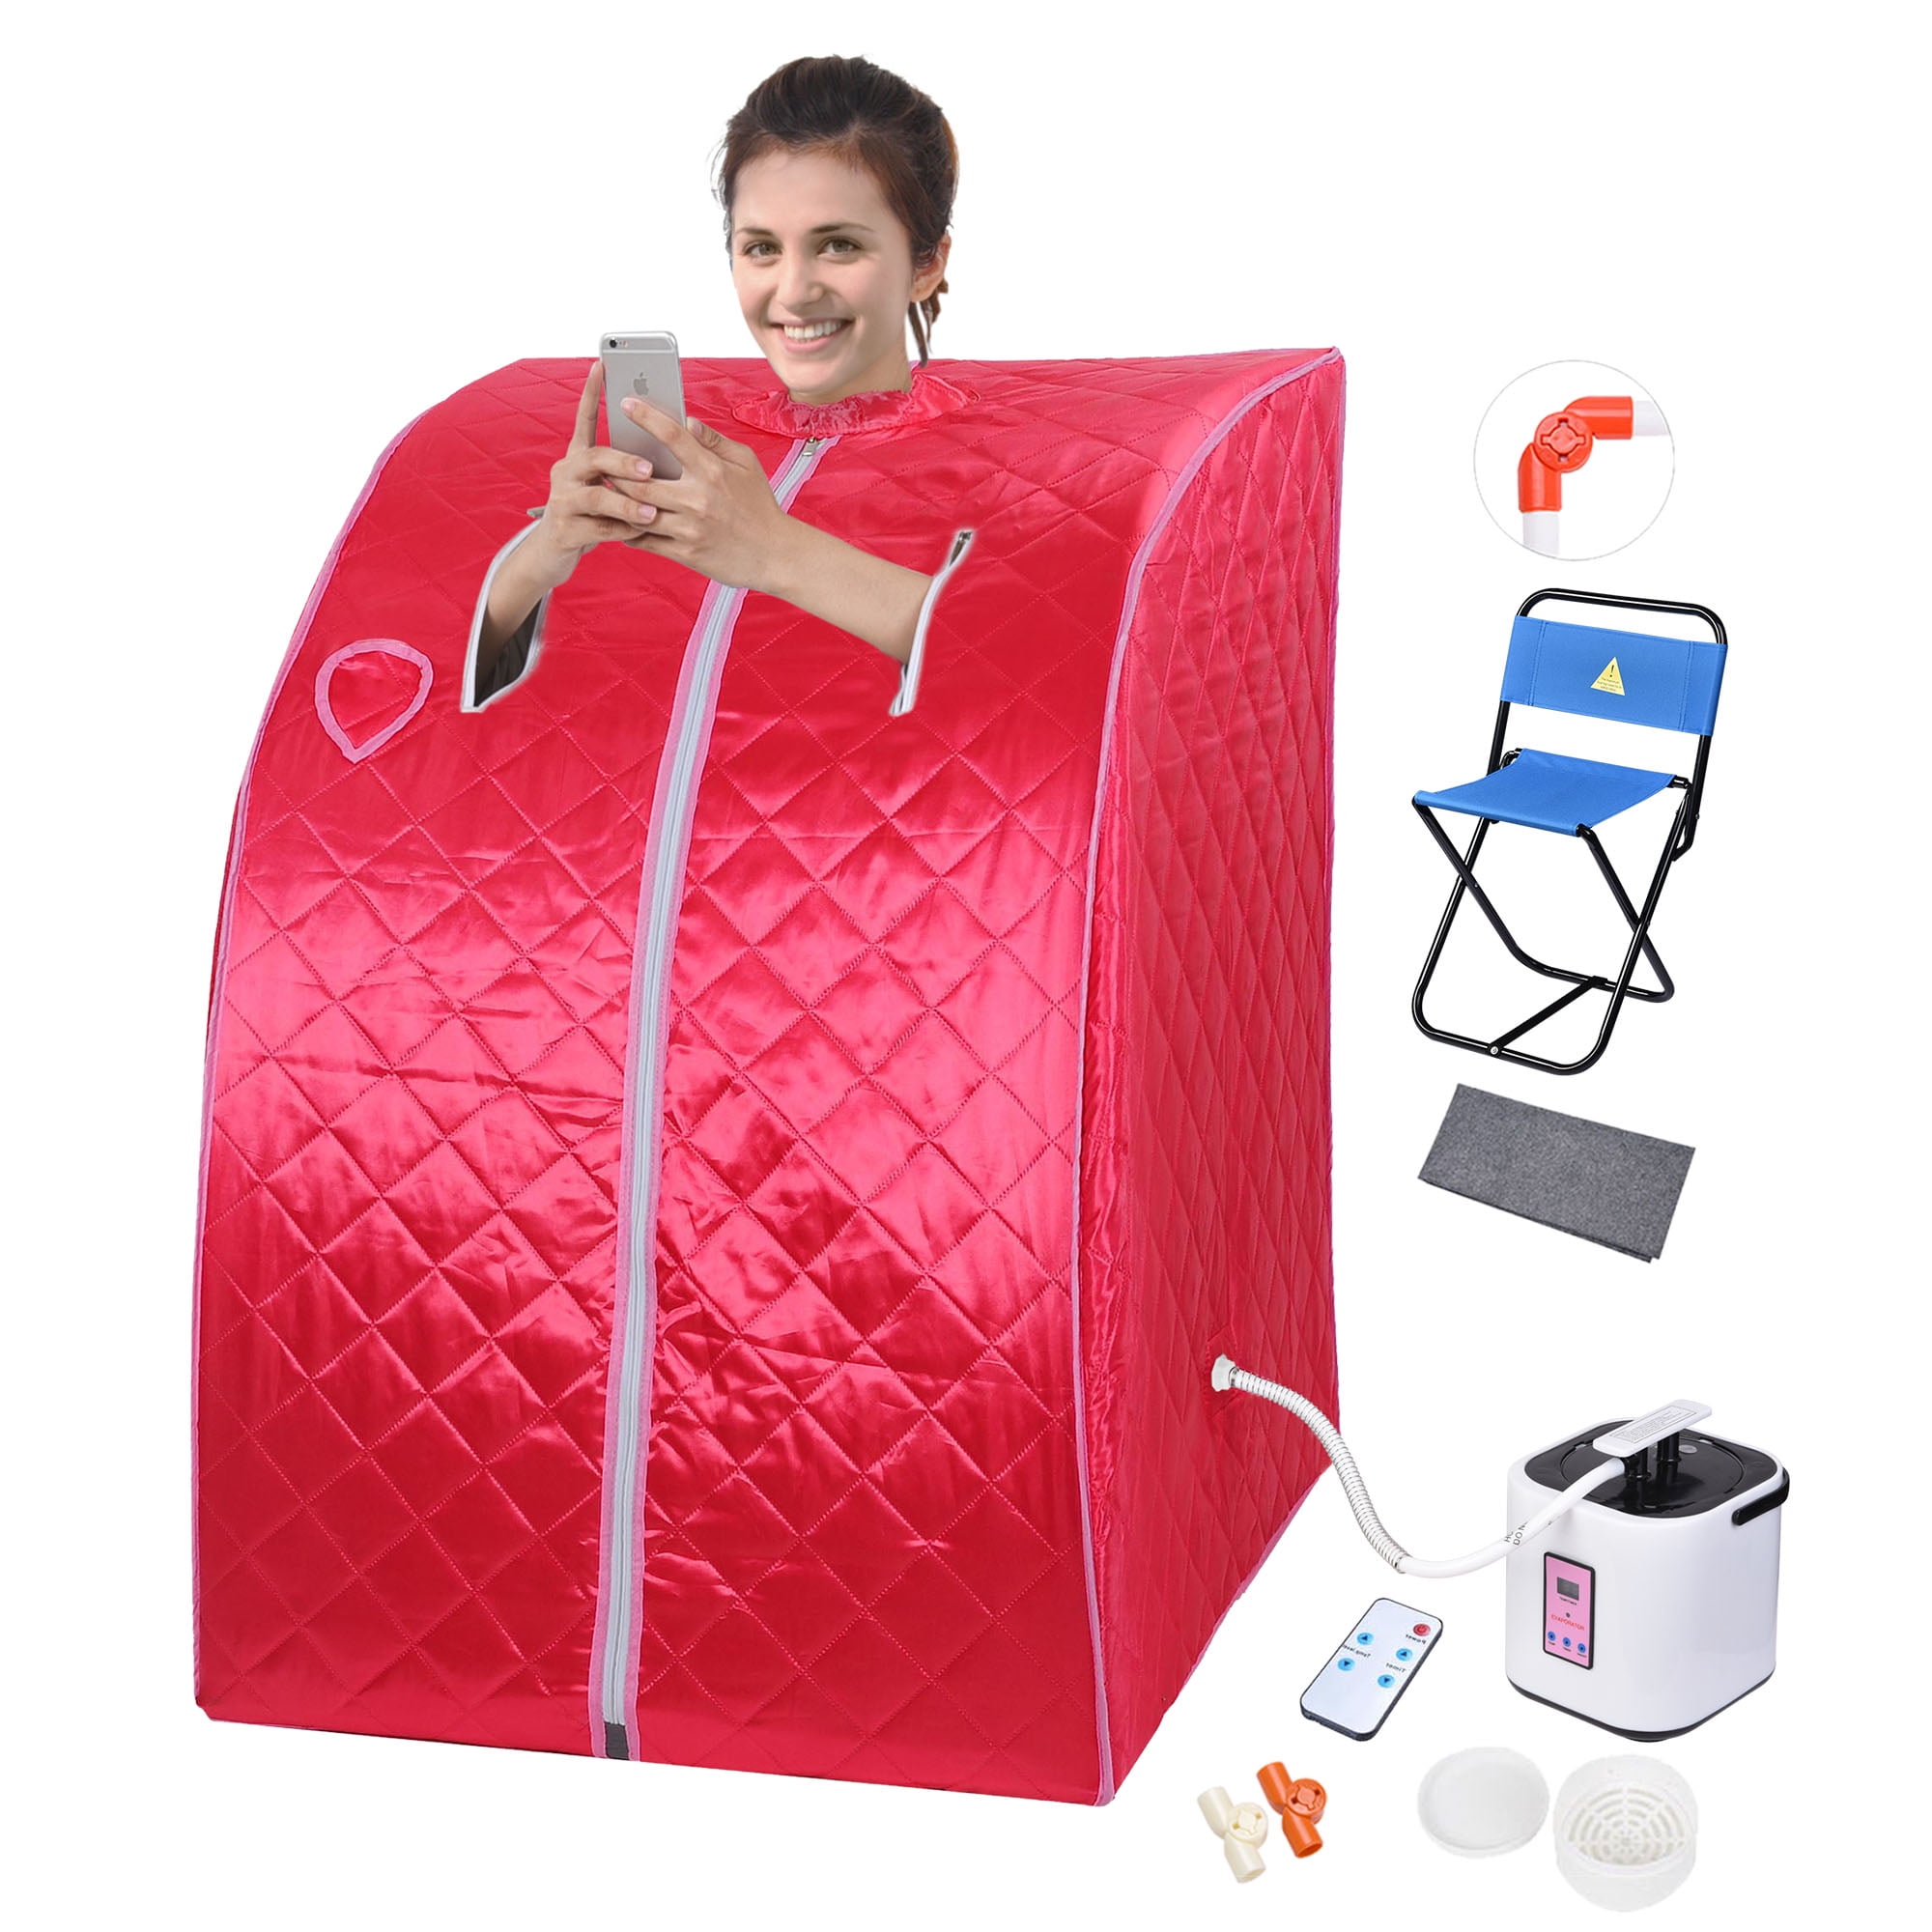 Yescom 2L Portable Personal Steam Sauna SPA W/ Large Chair Bath Indoor Home  Red